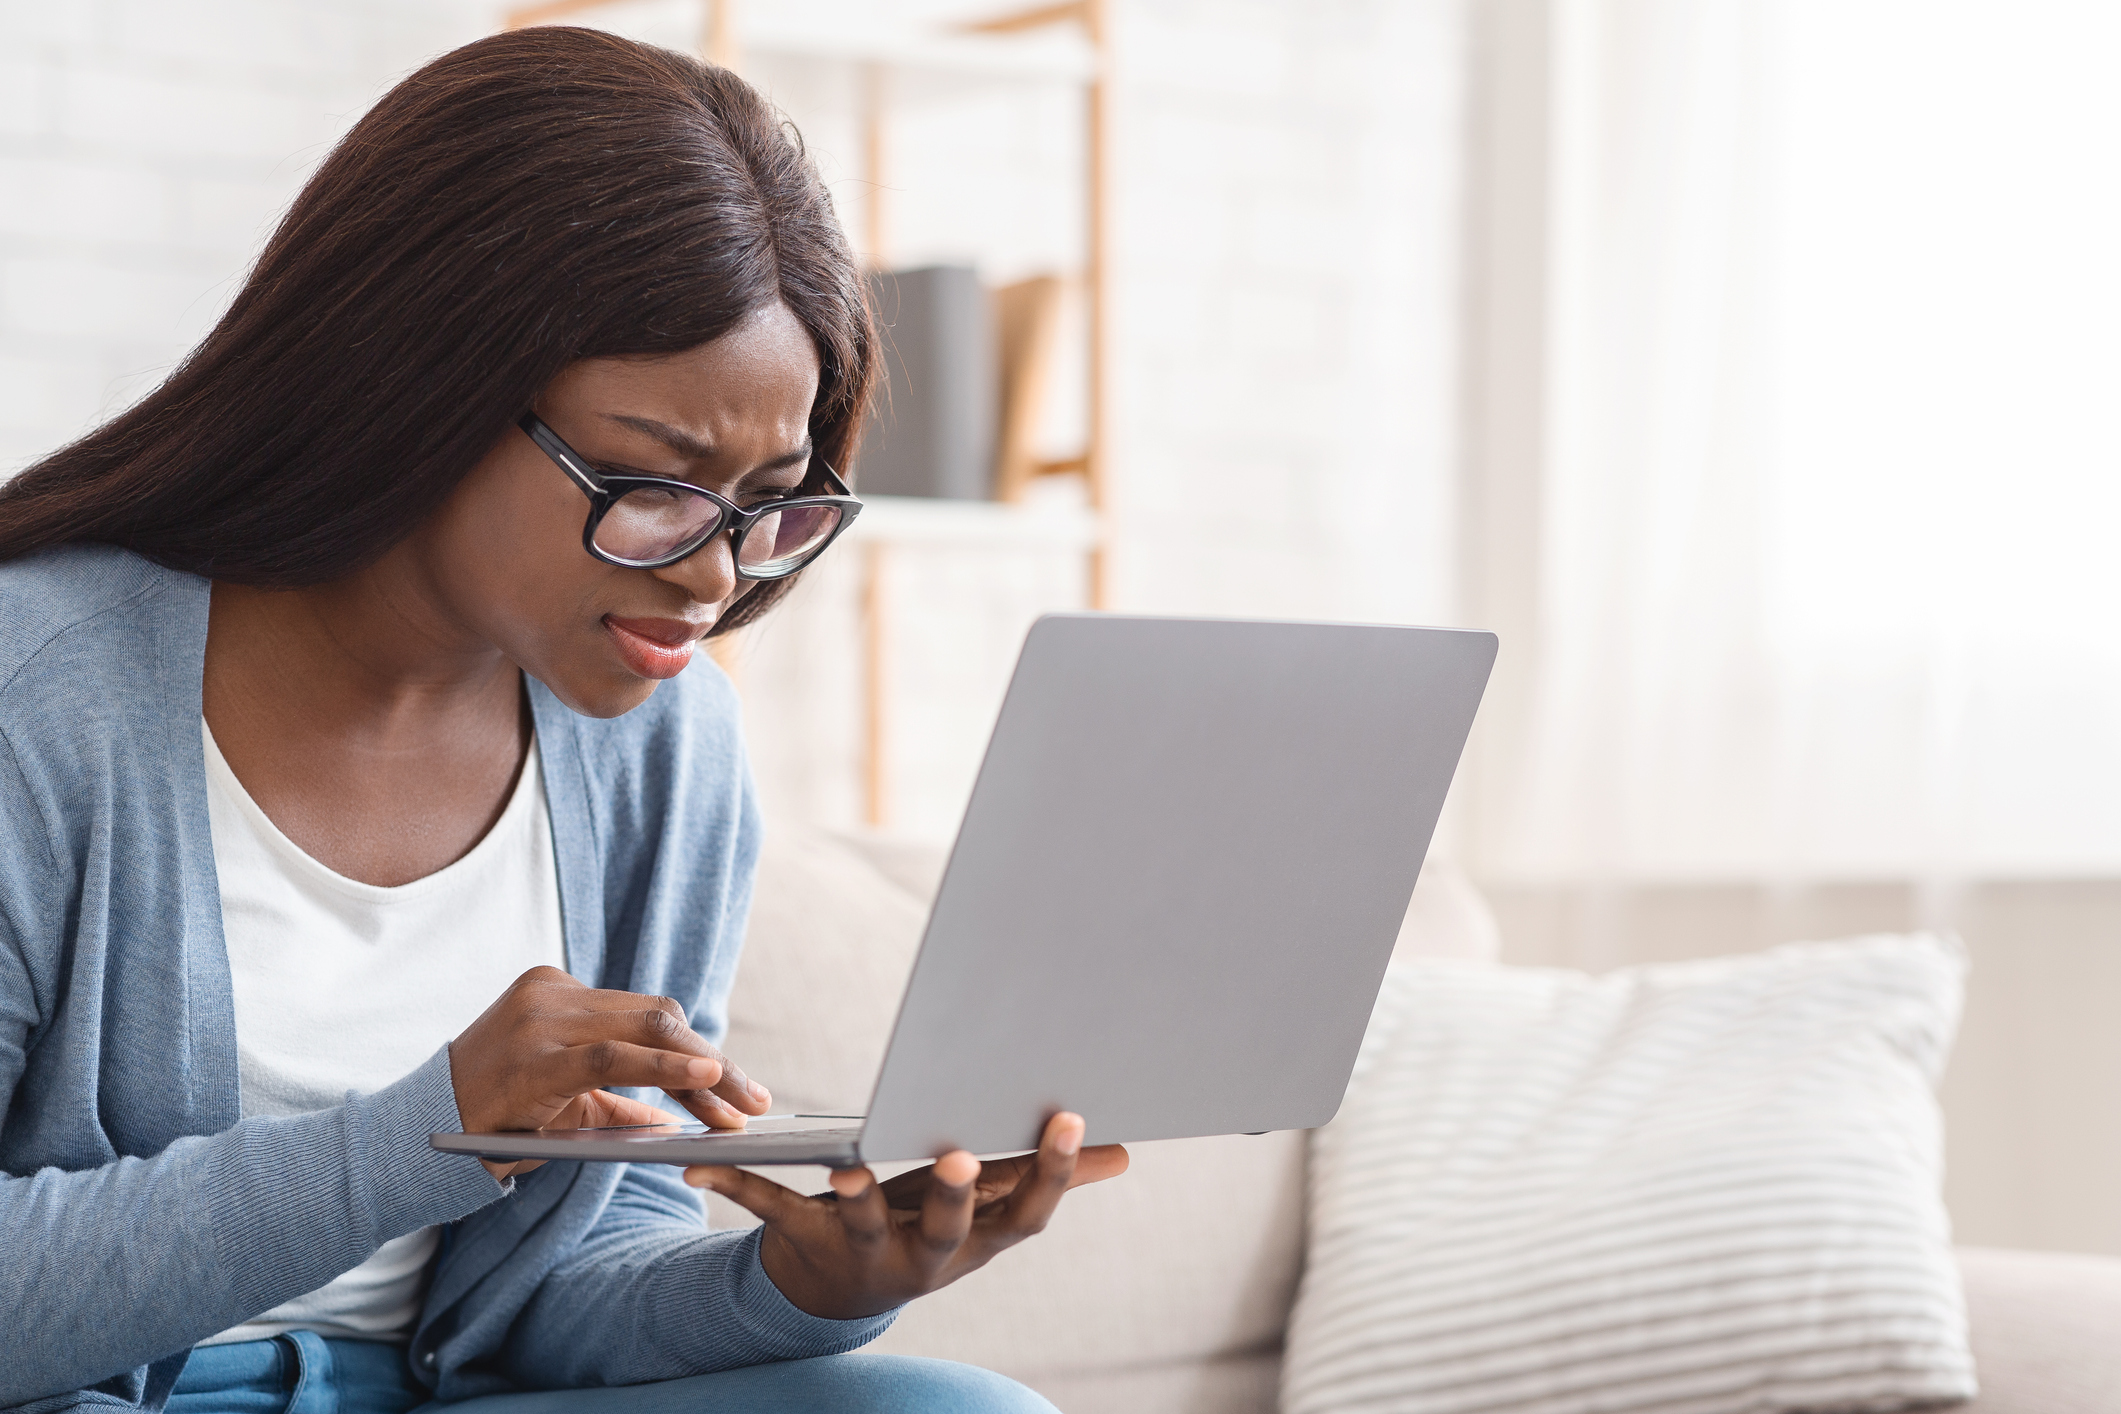 Woman in thick glasses squinting at a laptop